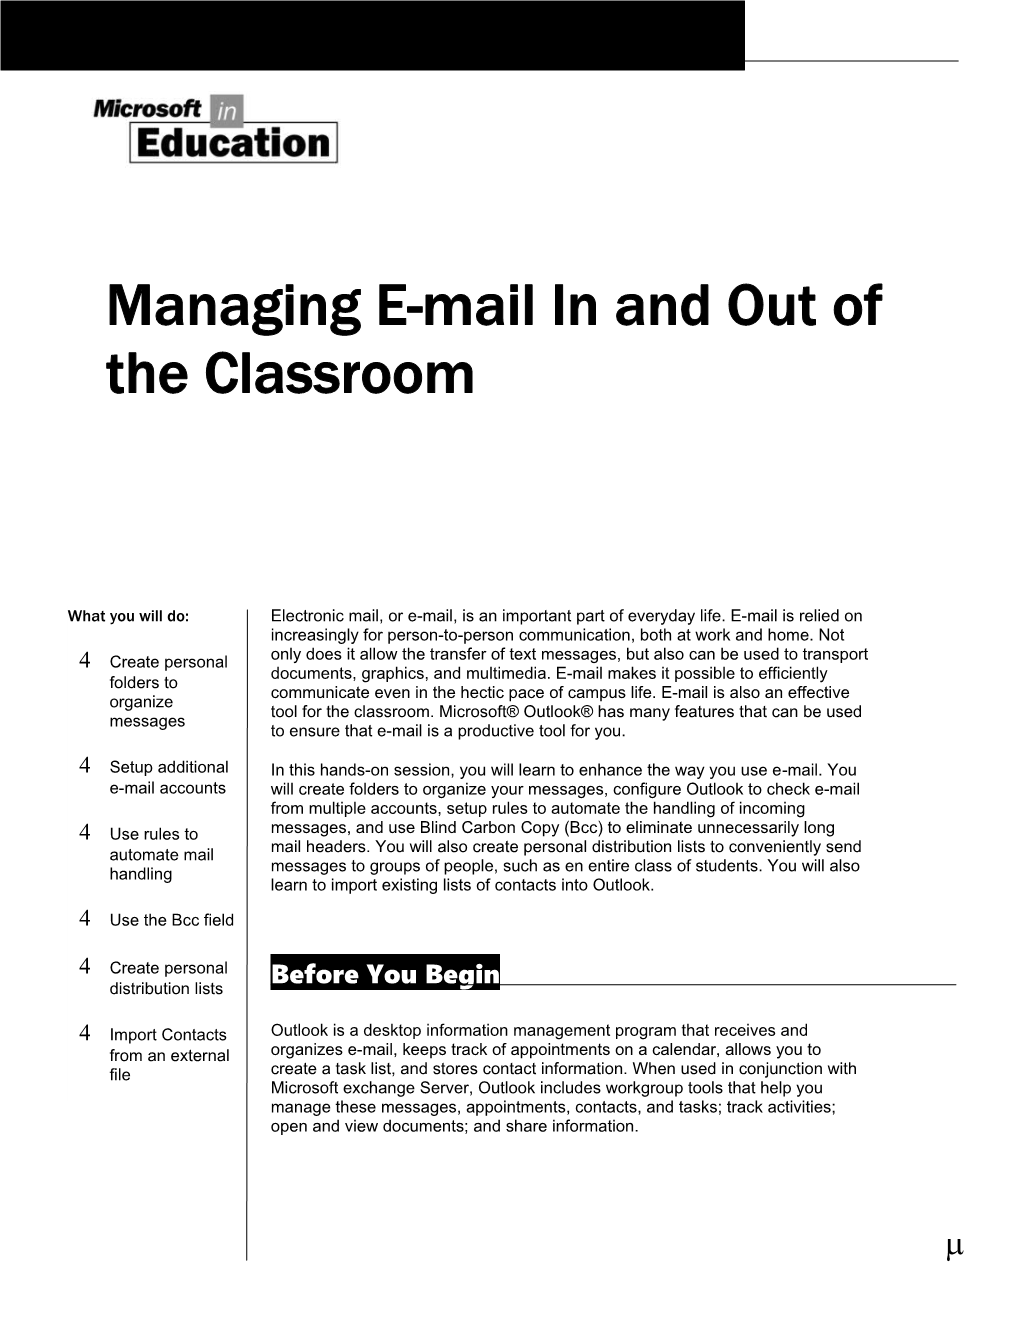 Managing E-Mail in and out of the Classroom